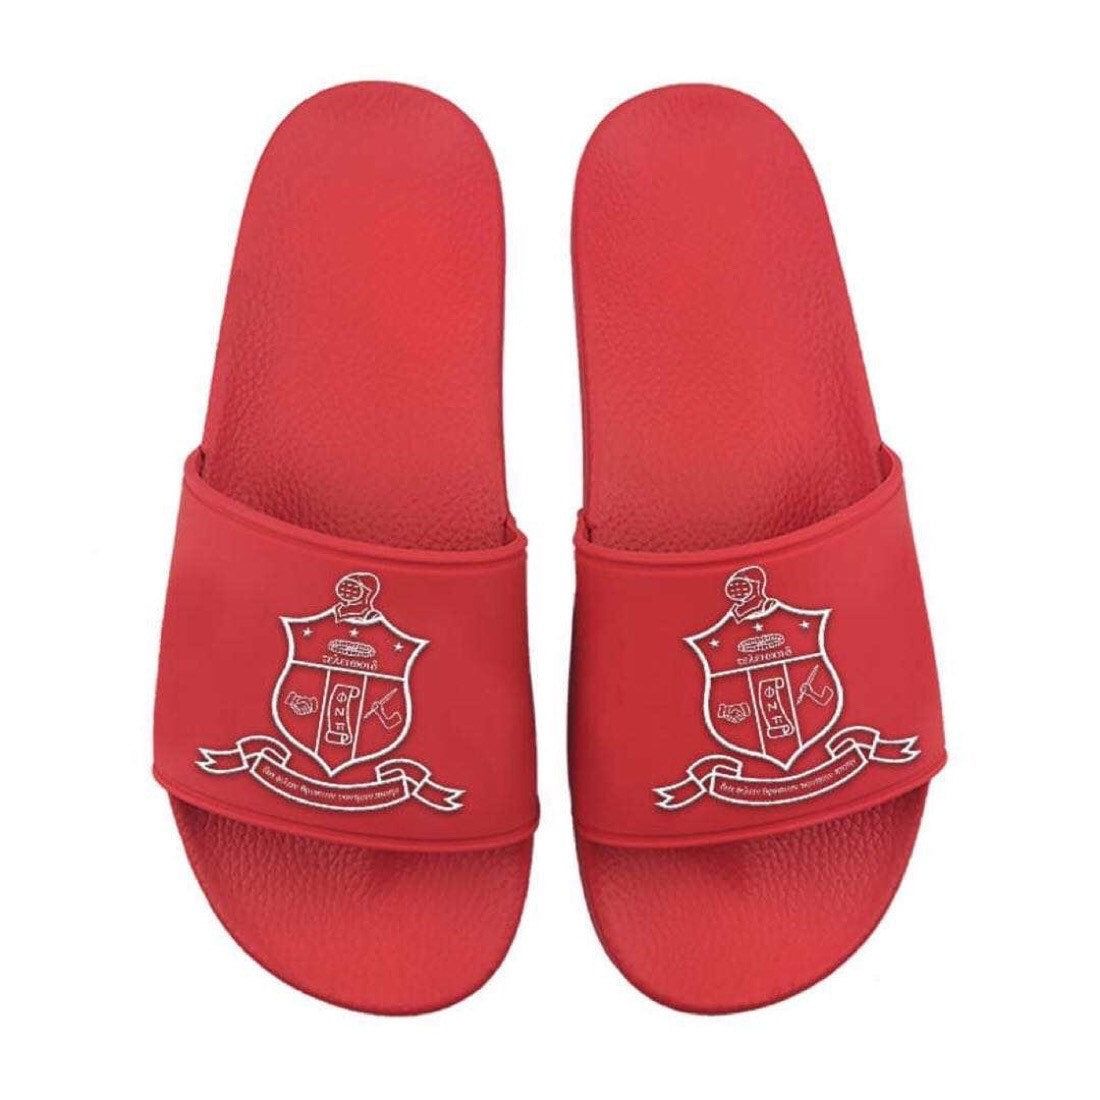 Check out our new KAPPA ALPHA PSI GREEK SLIDES. Treat your feet to these fun and stylish Kappa Alpha Psi footwear collection. Represent the coolest frat with these stylish, fashionable and comfortable slide / sandals. These slides are made with a sturdy sole and are meant to last. Awesome for a casual day, use on the beach, pool, gym and or Just Relaxing at home. You may wish to purchase a size larger than your normal size to maximize your comfort.